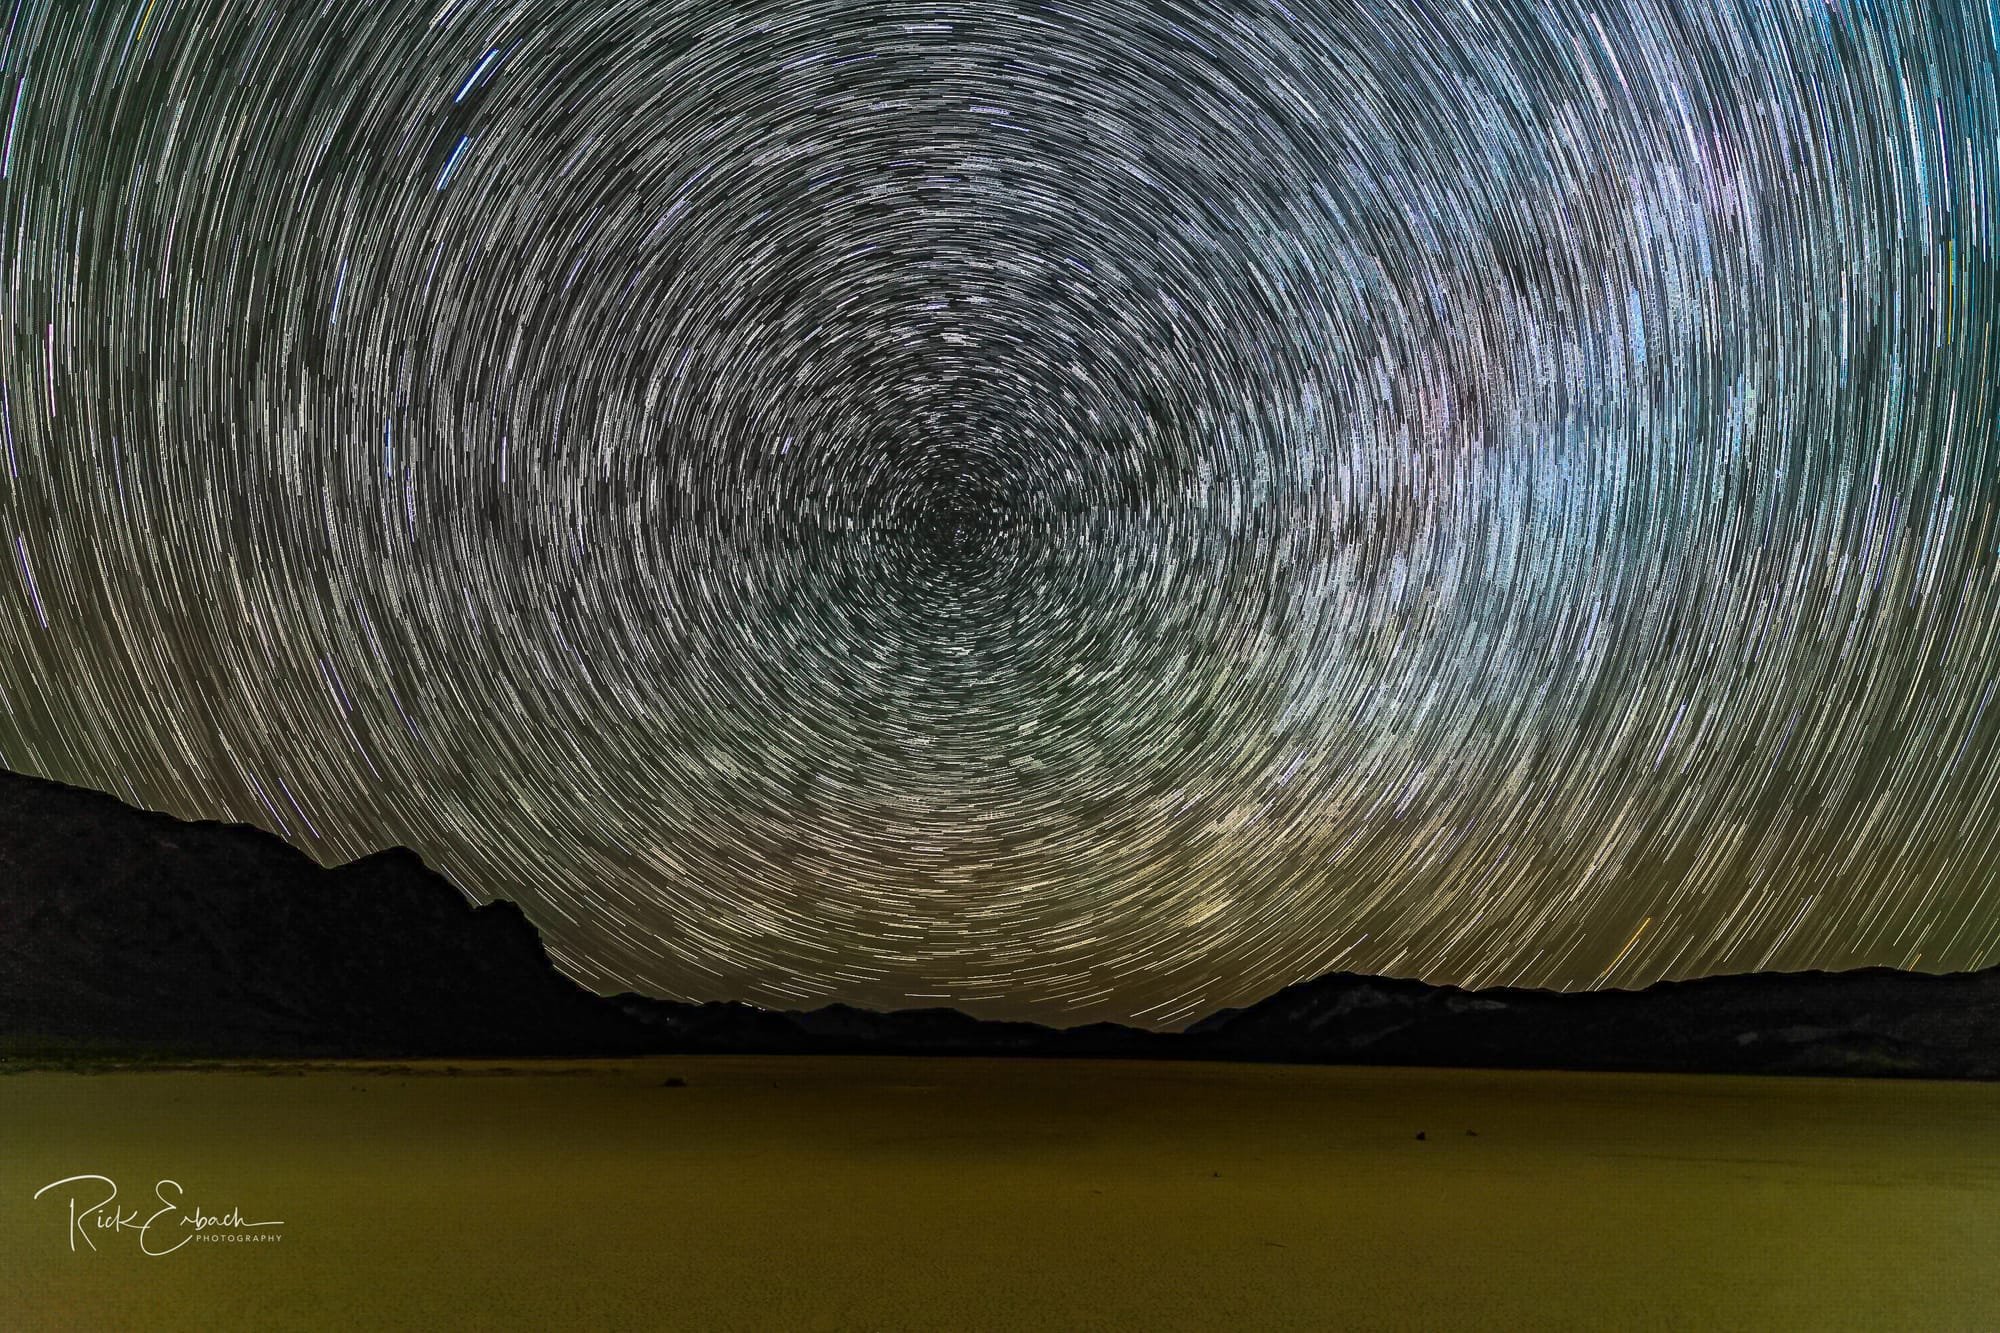 The Racetrack Playa Star Trails